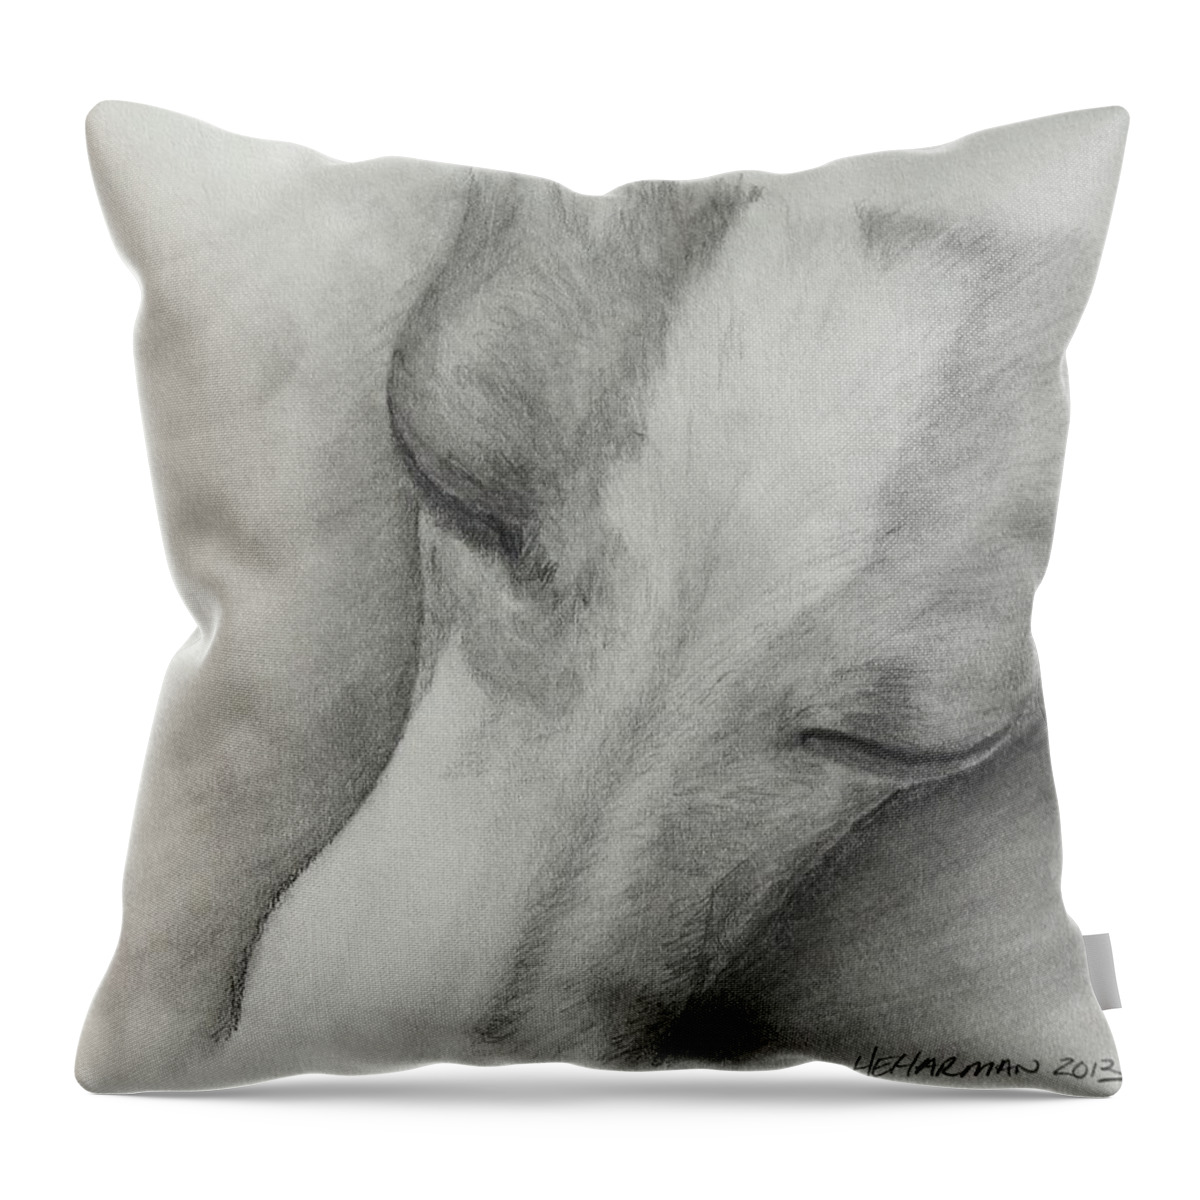 Italian Greyhound Throw Pillow featuring the drawing Comfy by Heather E Harman